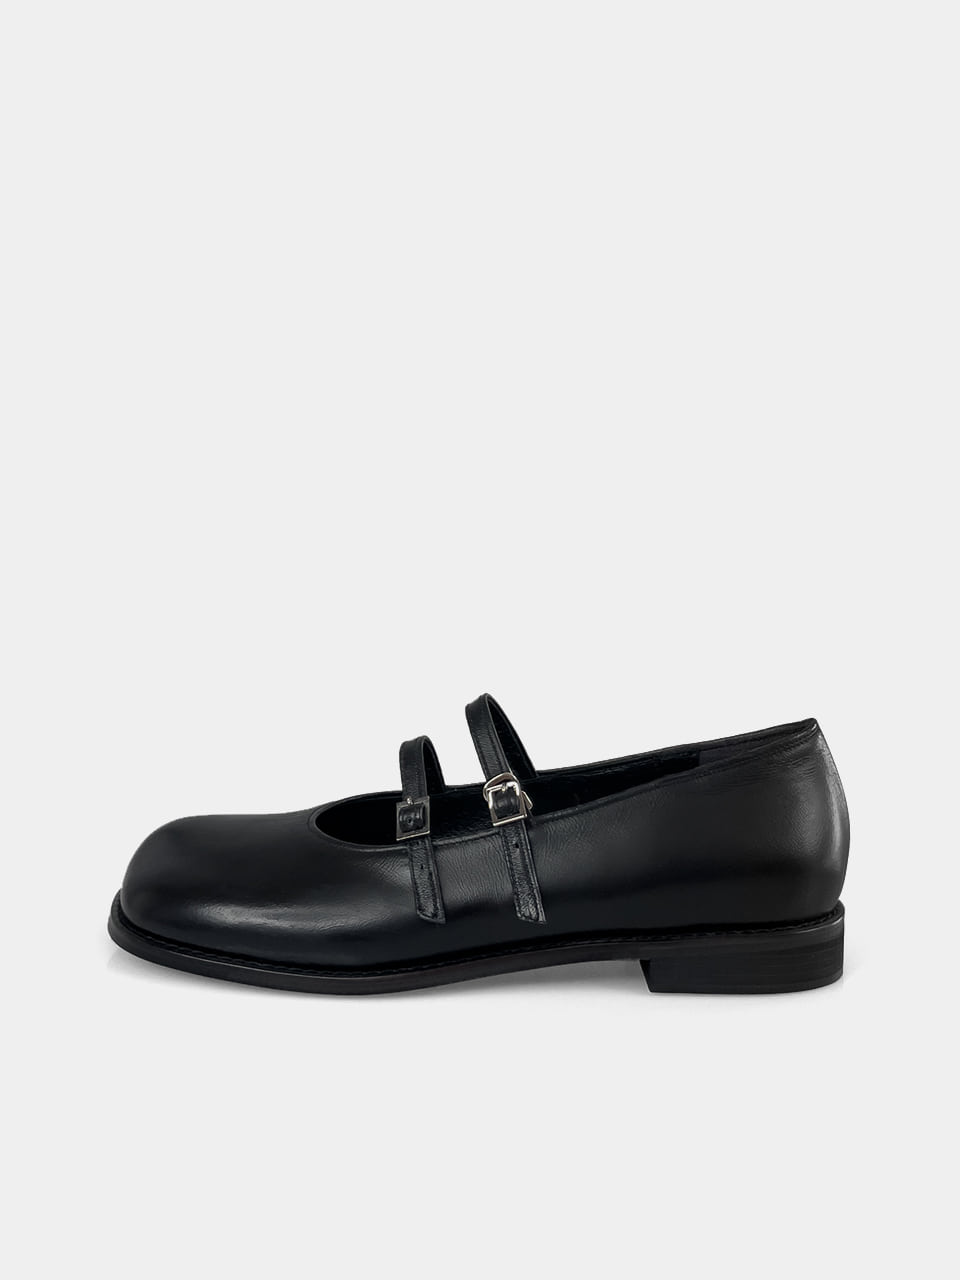 [Out of stock] Mrc101 Mary Jane Flat (Black)